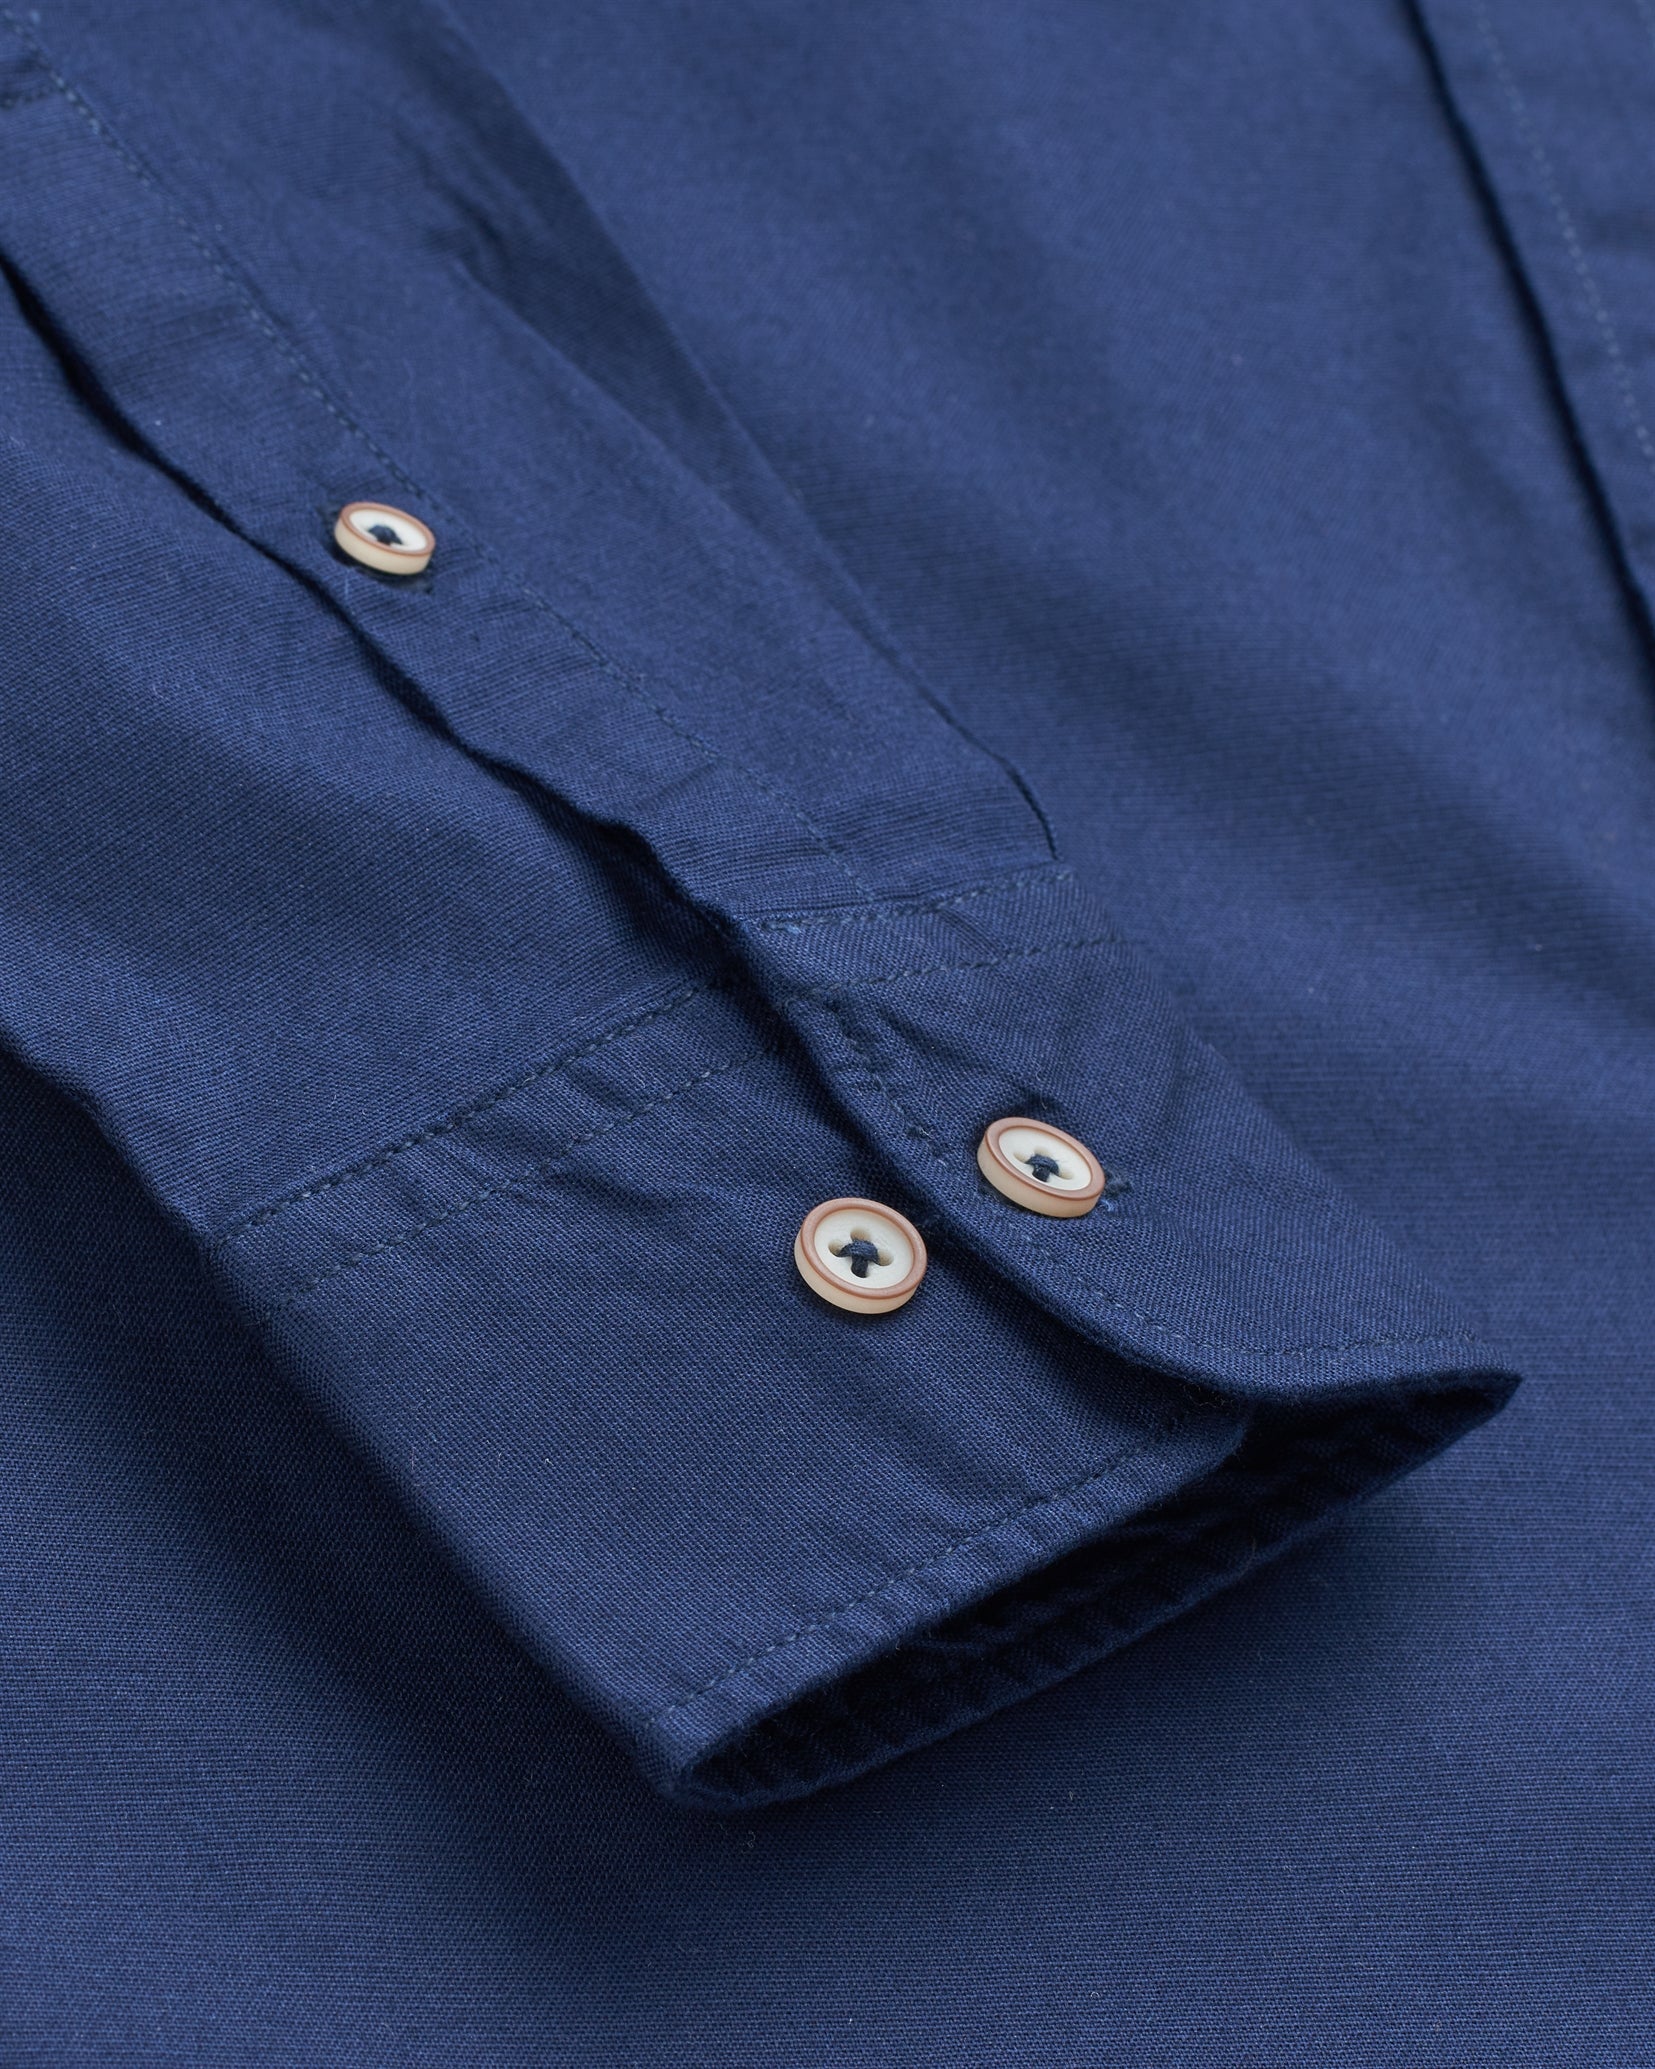 Bare Brown - Navy Stretch Cotton Shirt, Slim Fit